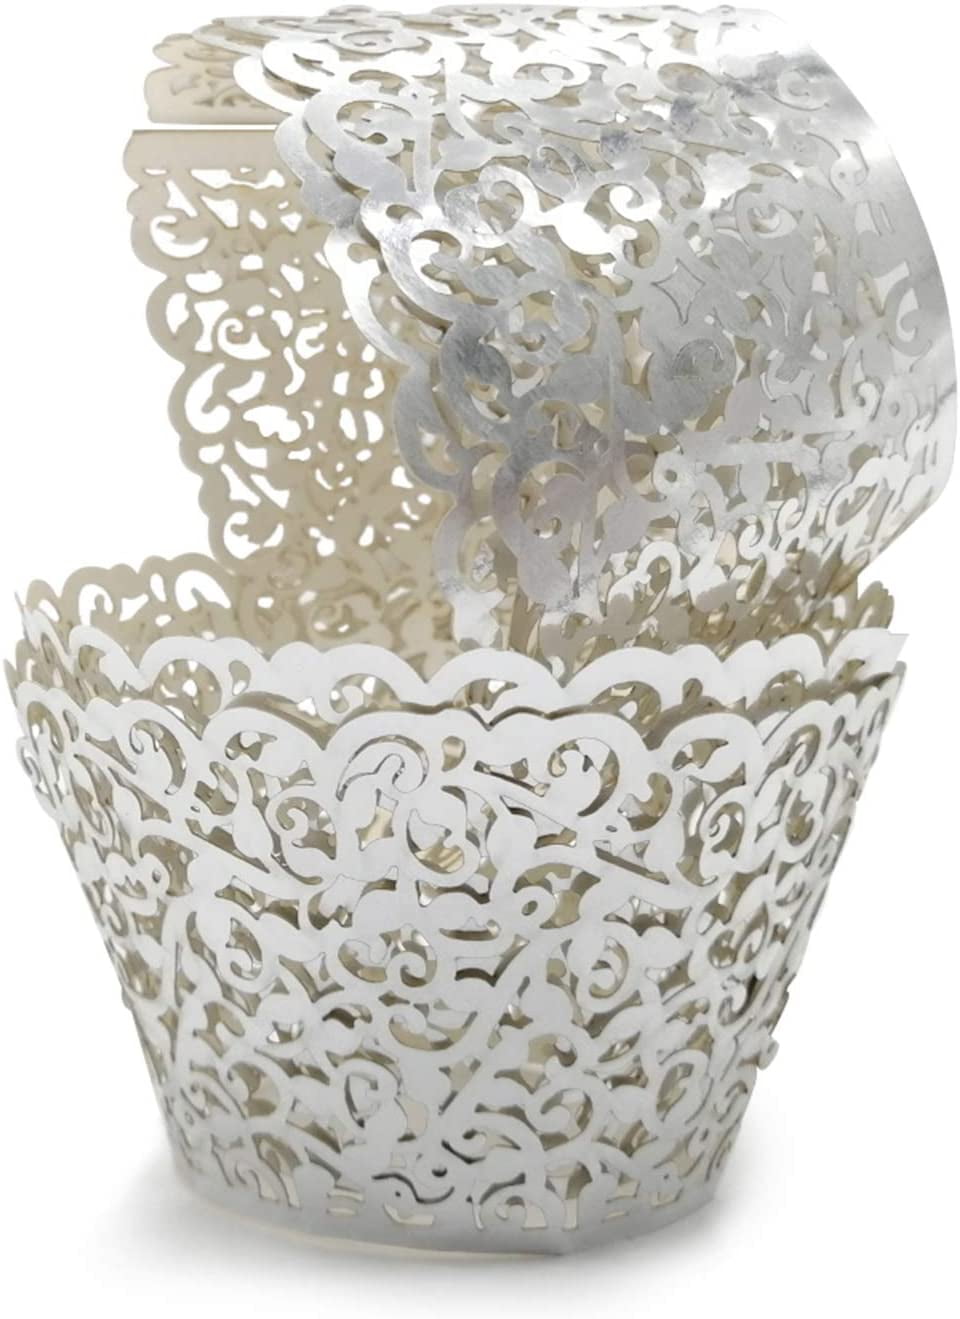 200pc Cupcake Wrappers Vine Designed Laser Cut Cupcake Wraps Lace Cupcake Liners Baking Cup Muffin Case Trays for Wedding Baby Shower Brithday Decorations Artistic Bake Cake Paper Cups 